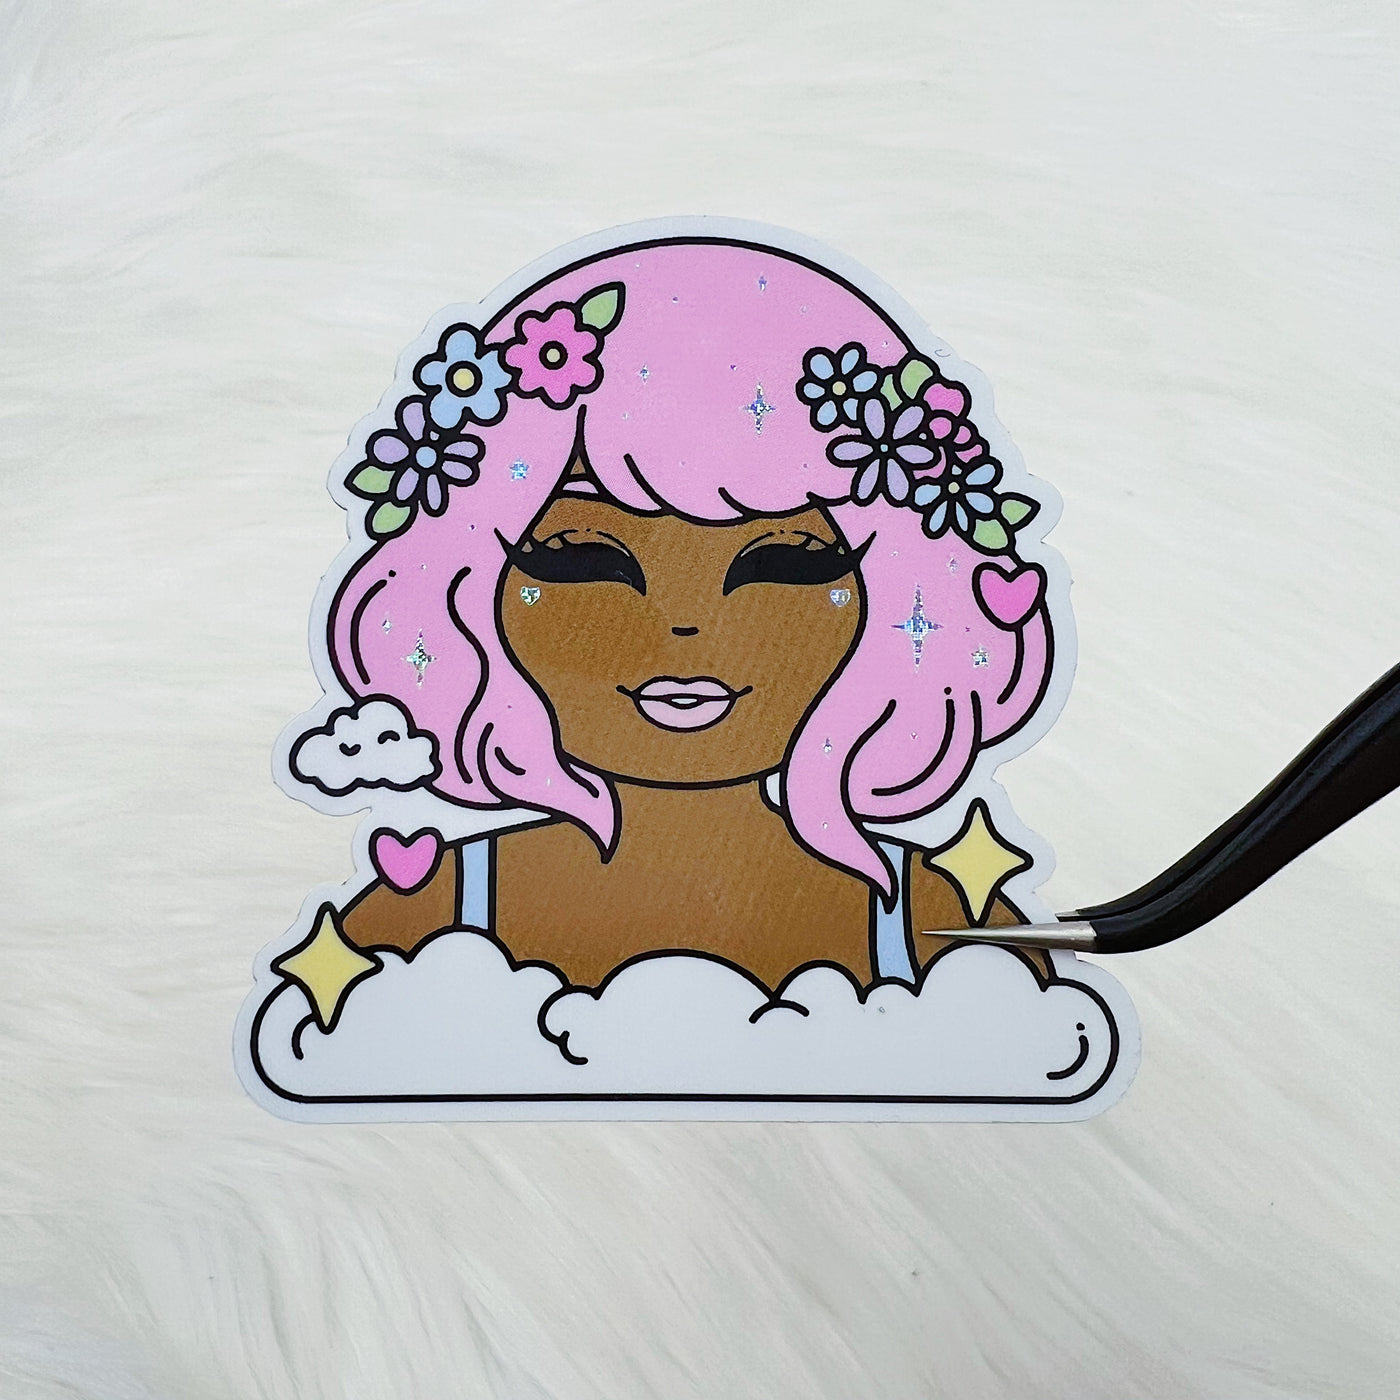 Holographic Glitter Kawaii in the Clouds Babe Vinyl Sticker Die Cut | Choose Your Skin Tone!